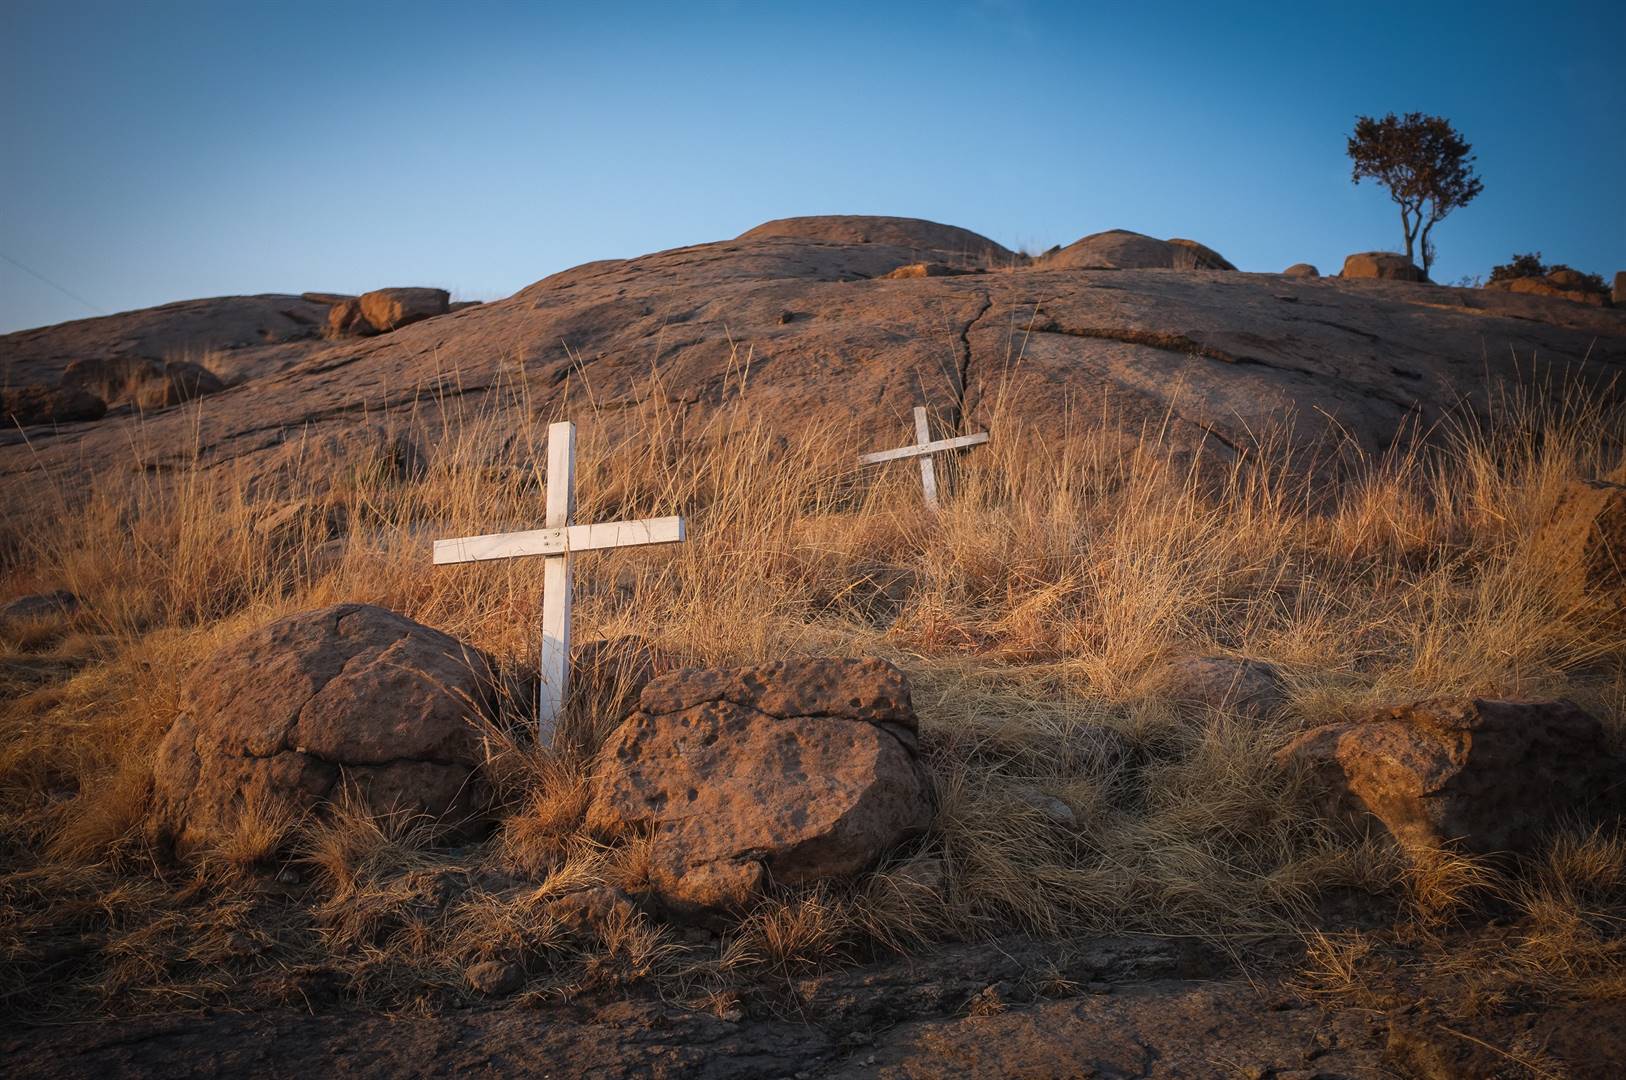 Crosses for those who died in the Marikana tragedy. Photo: Getty Images